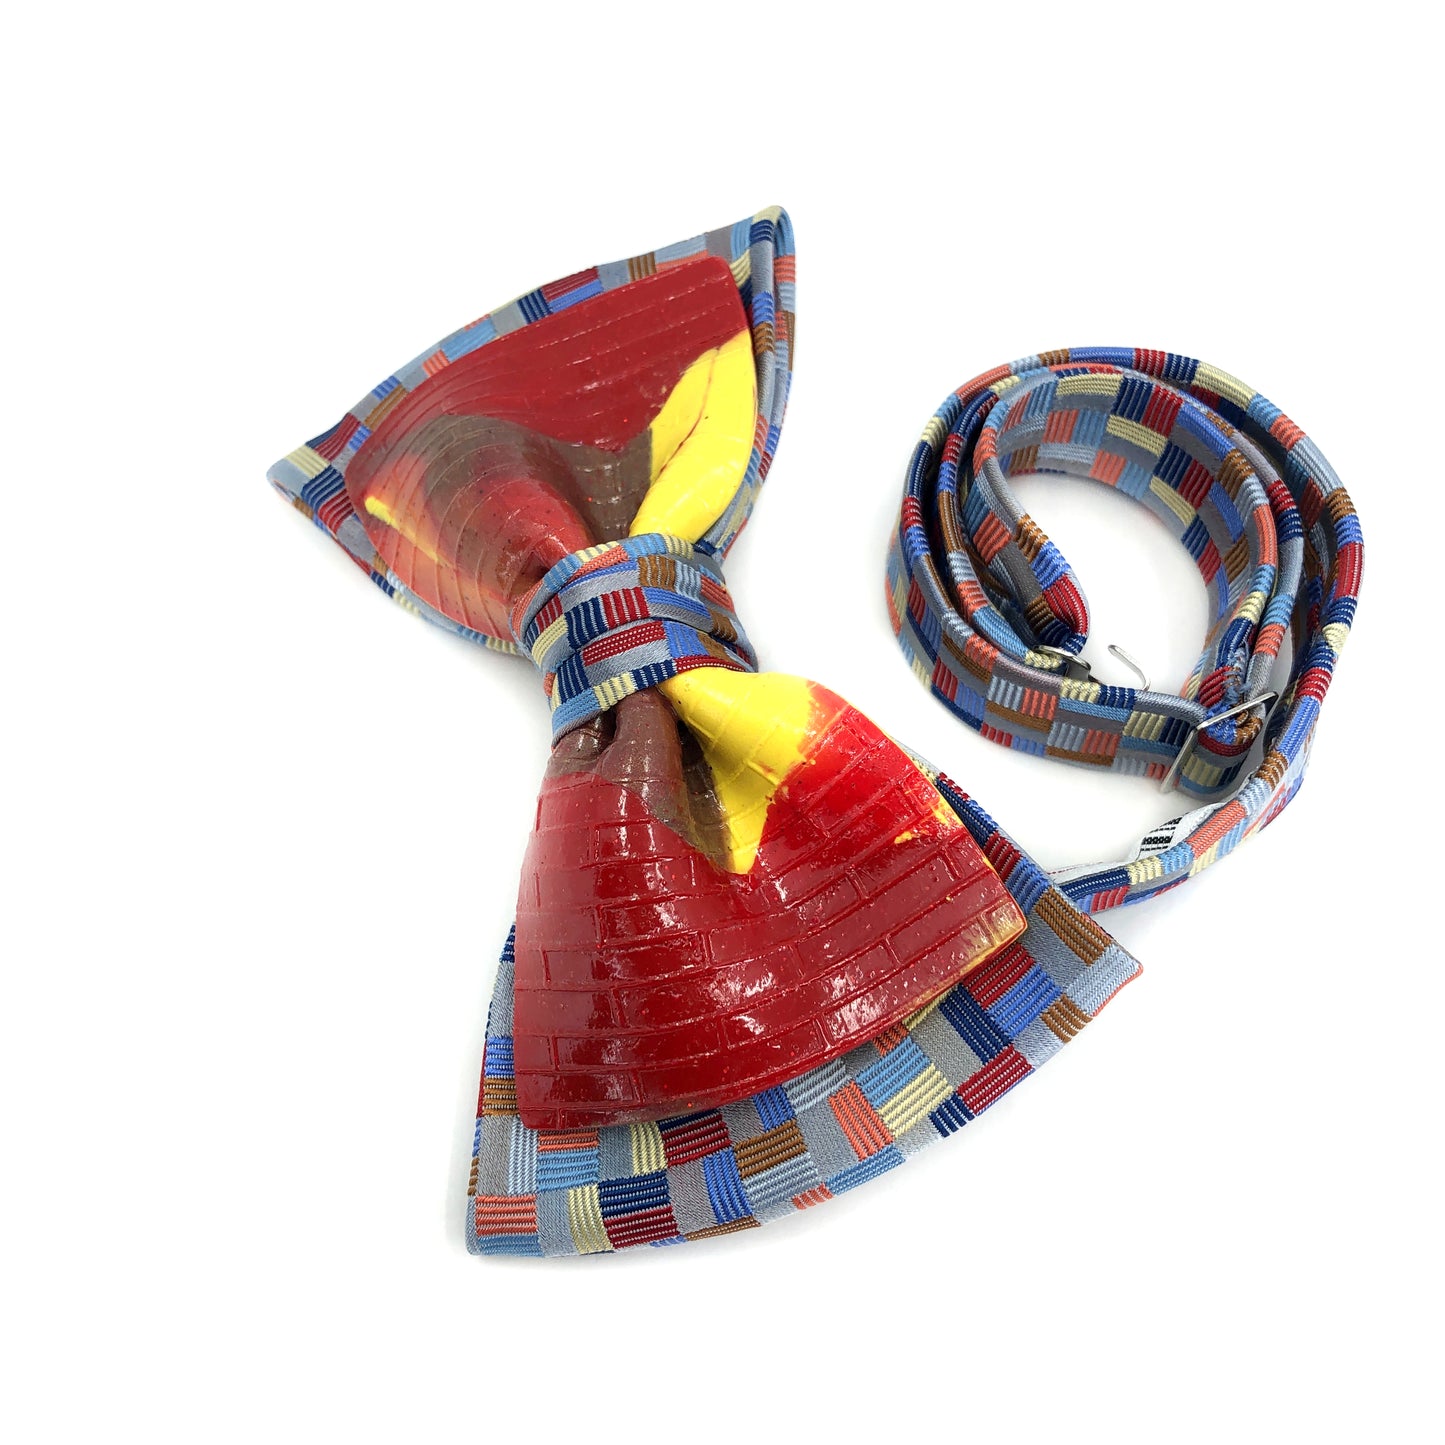 Madison Select Series Bow Tie